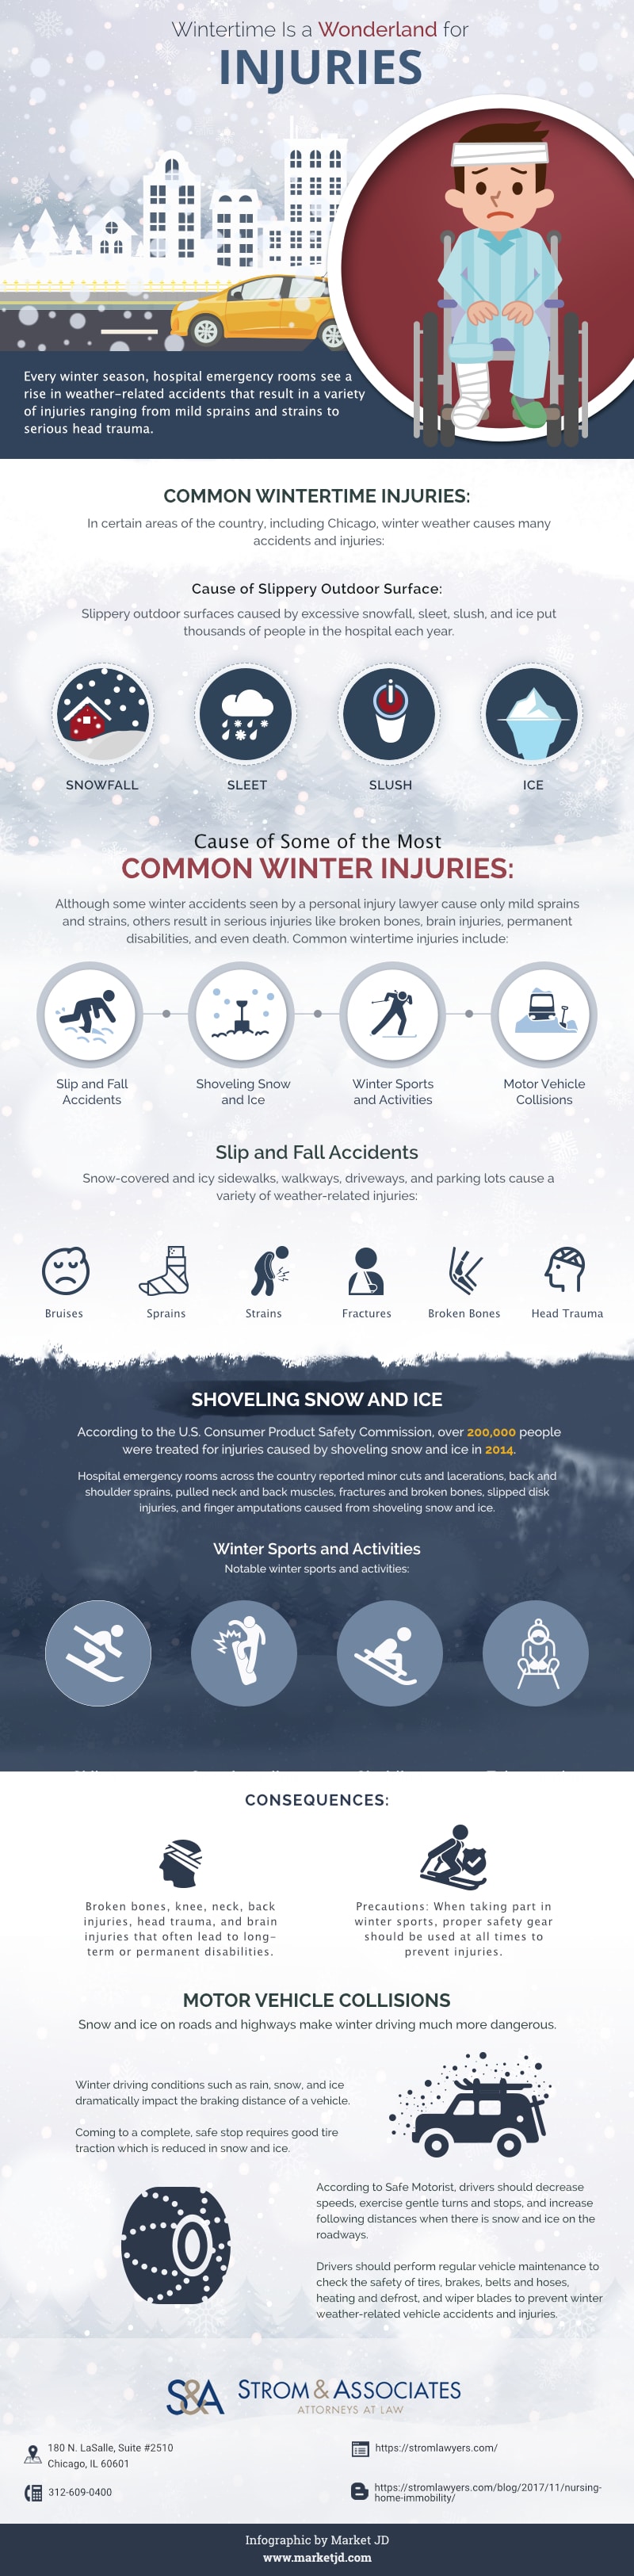 Wintertime injuries infographic